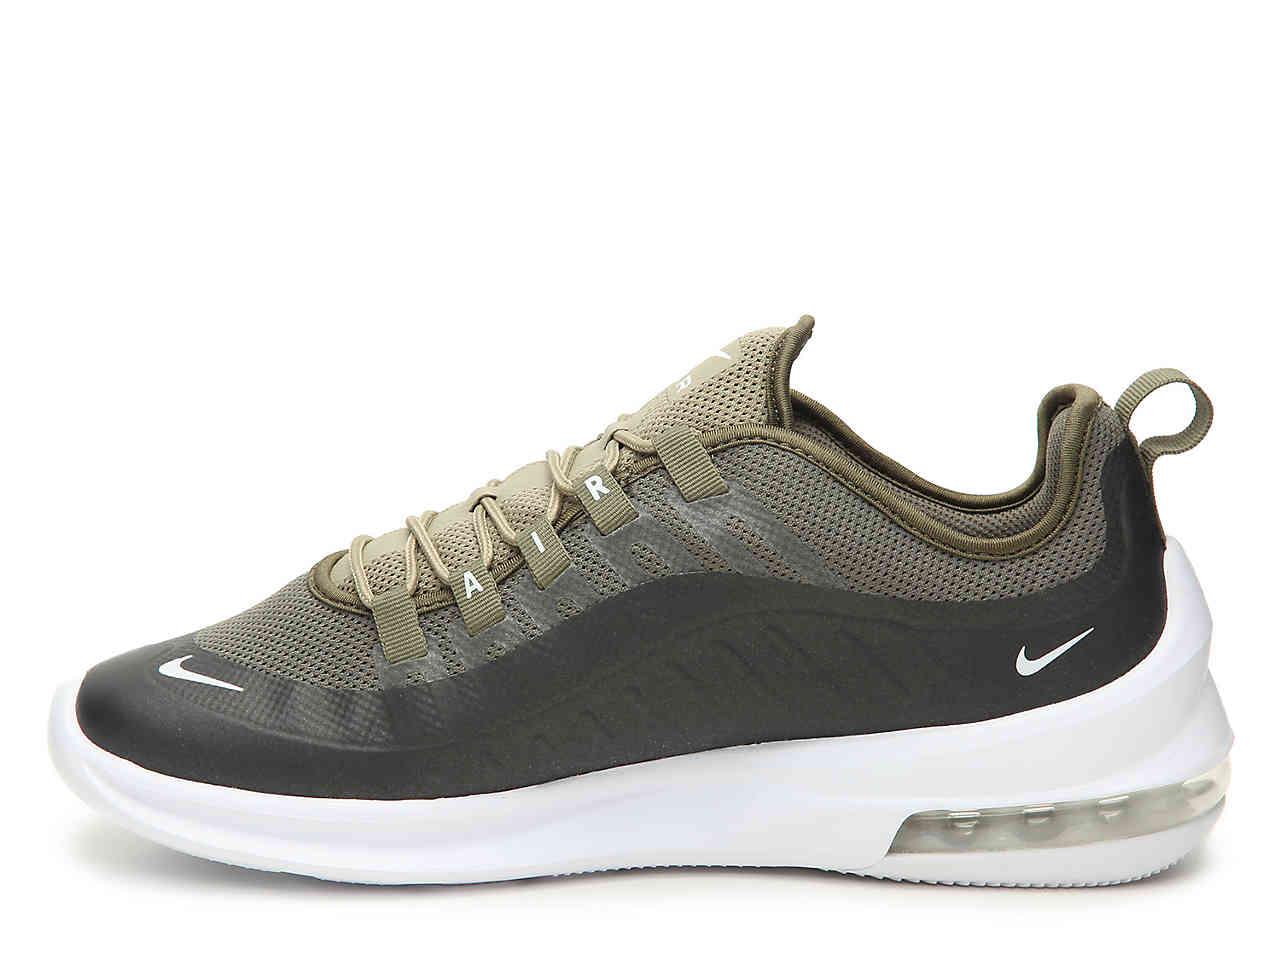 Nike Synthetic Air Max Axis Sneaker in Olive Green (Green) for Men - Lyst